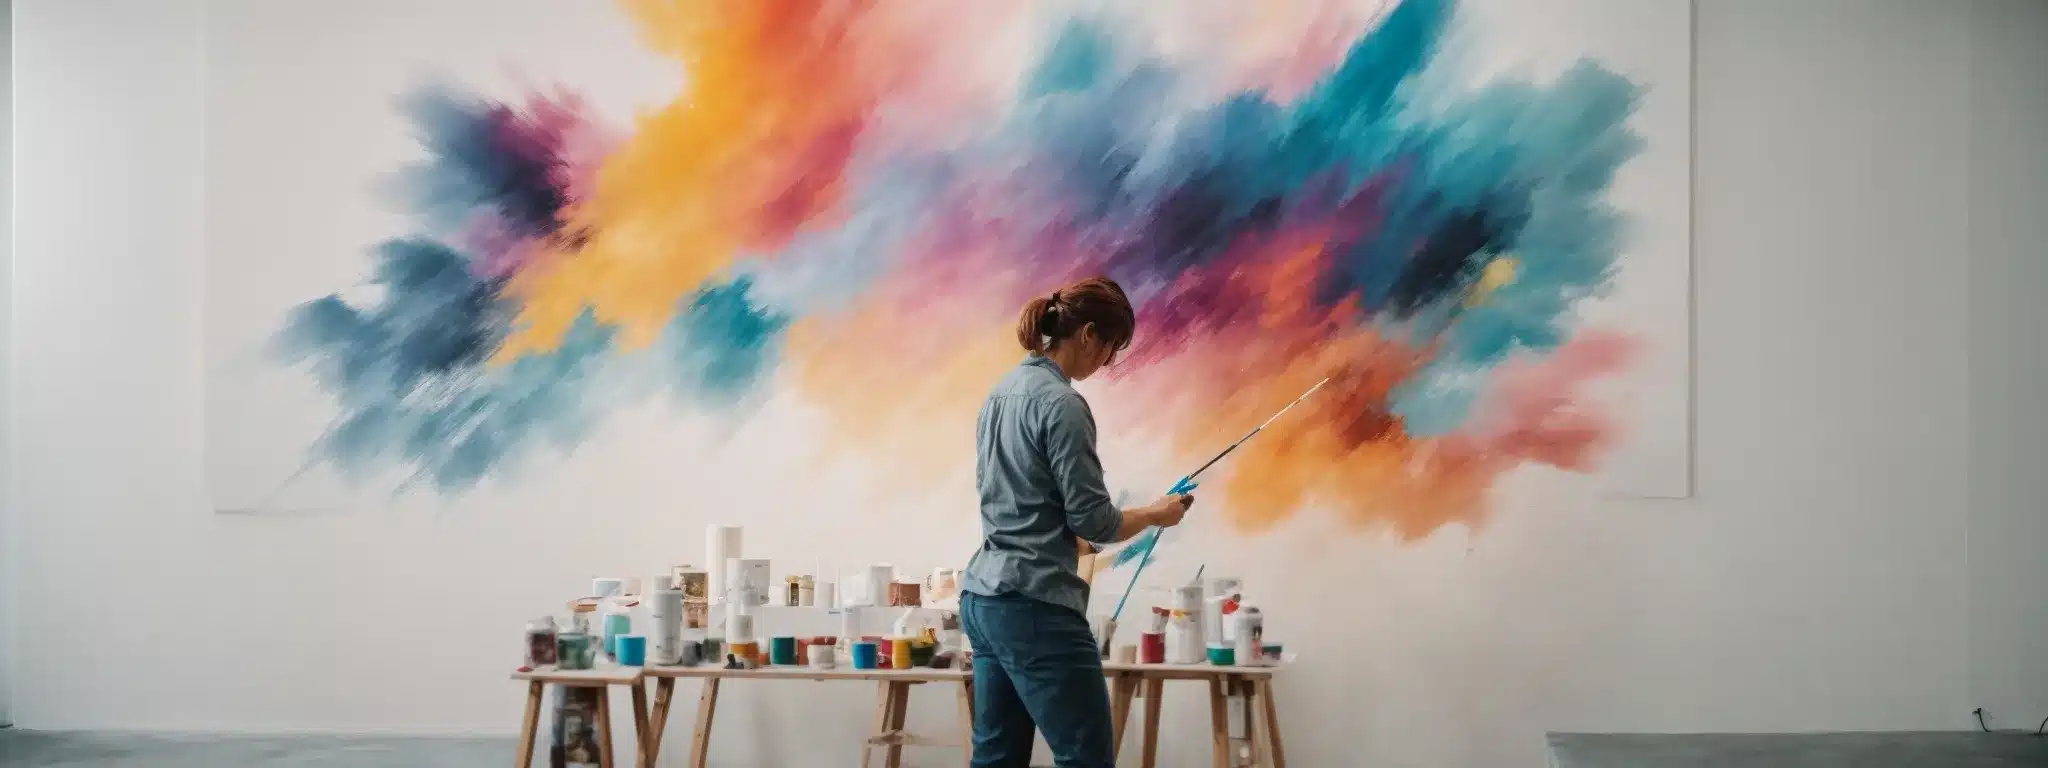 A Designer Thoughtfully Painting A Vibrant, Abstract Logo Onto A Large Canvas In A Well-Lit, Modern Studio.